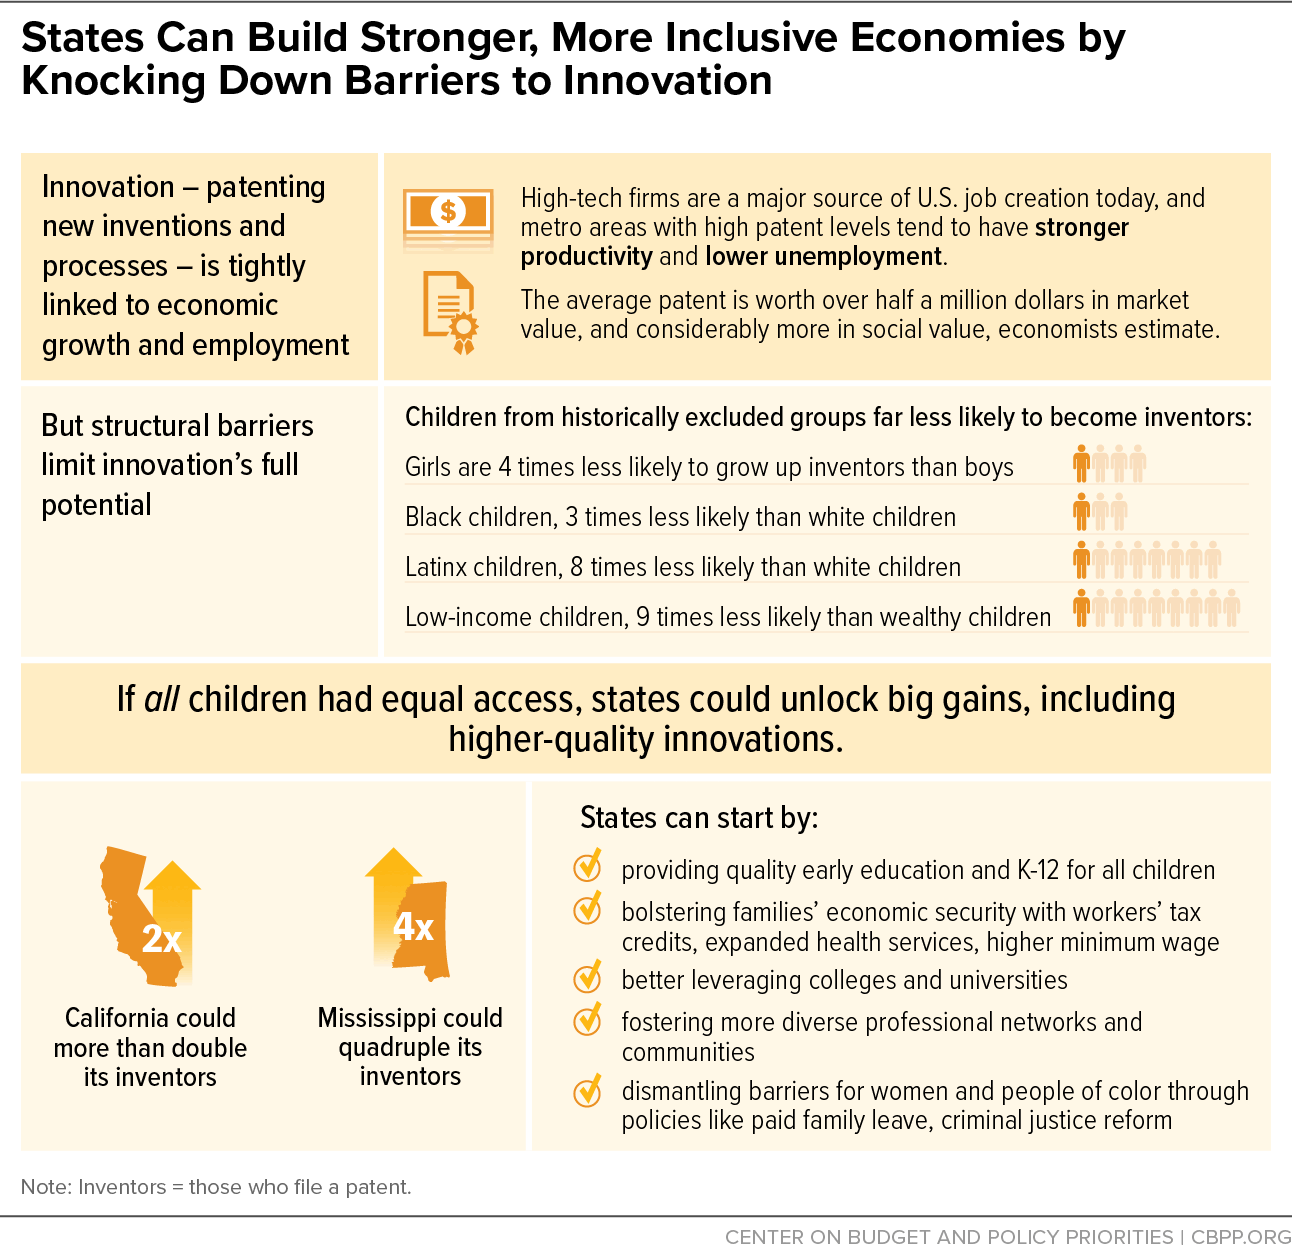 States Can Build Stronger, More Inclusive Economies by Knocking Down Barriers to Innovation